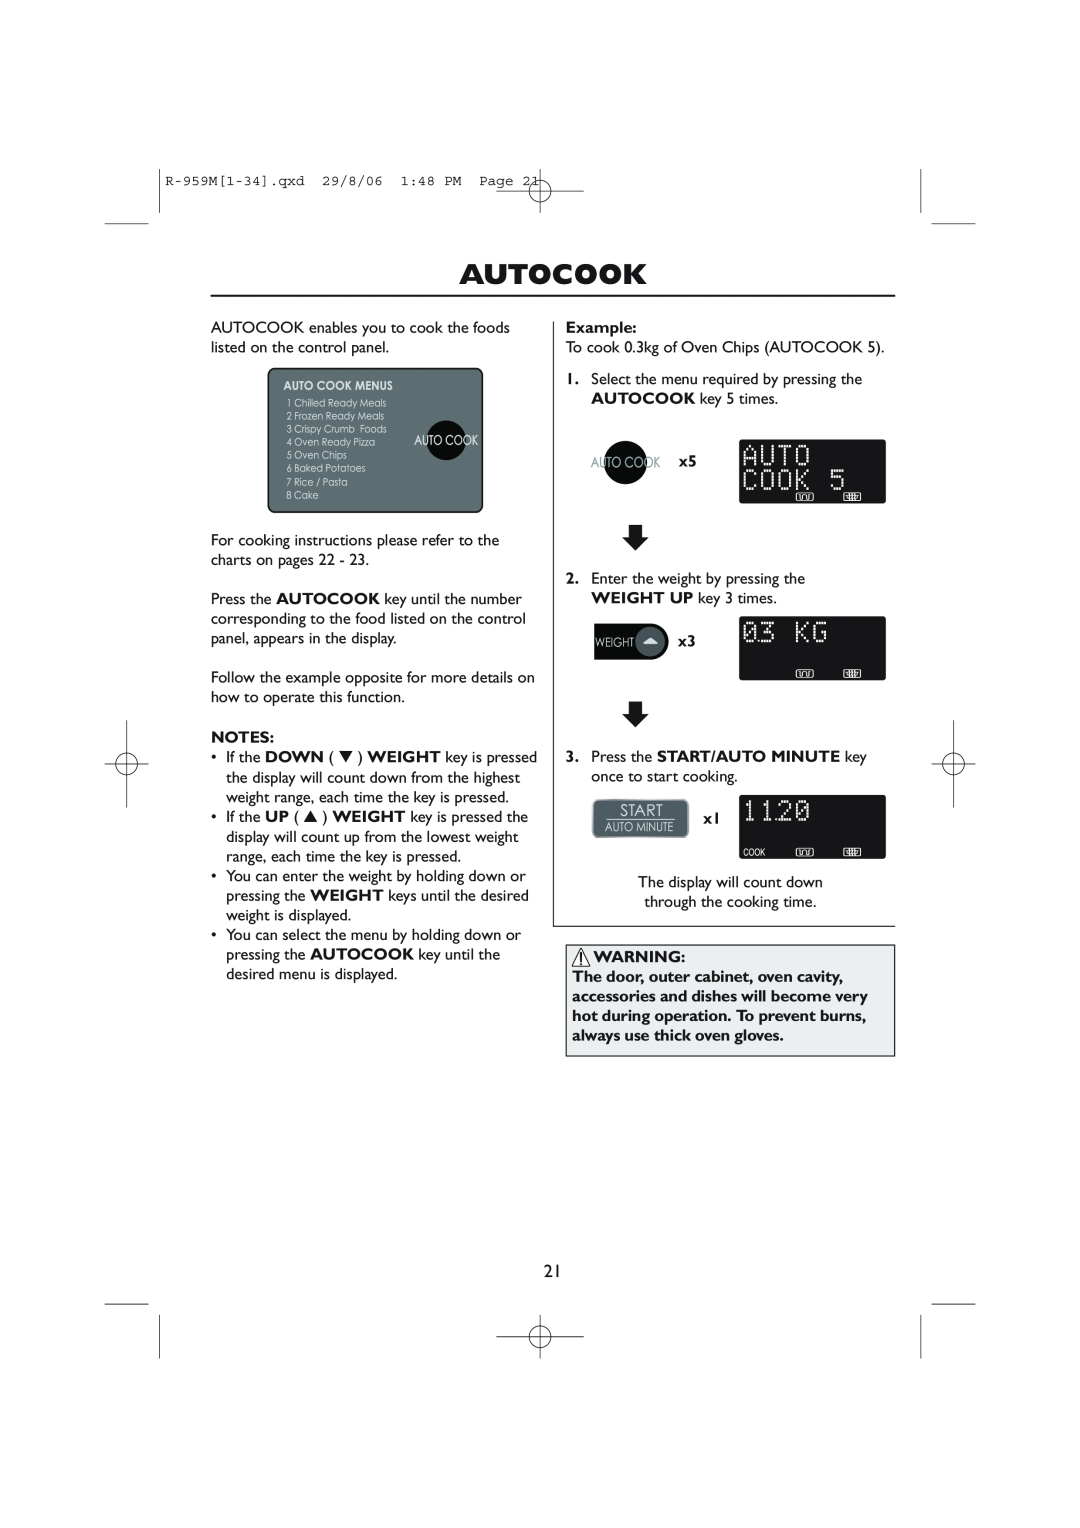 Sharp R-959M, R-98STM-A operation manual Autocook, x3 3. Press the START/AUTO MINUTE key once to start cooking x1, Example 